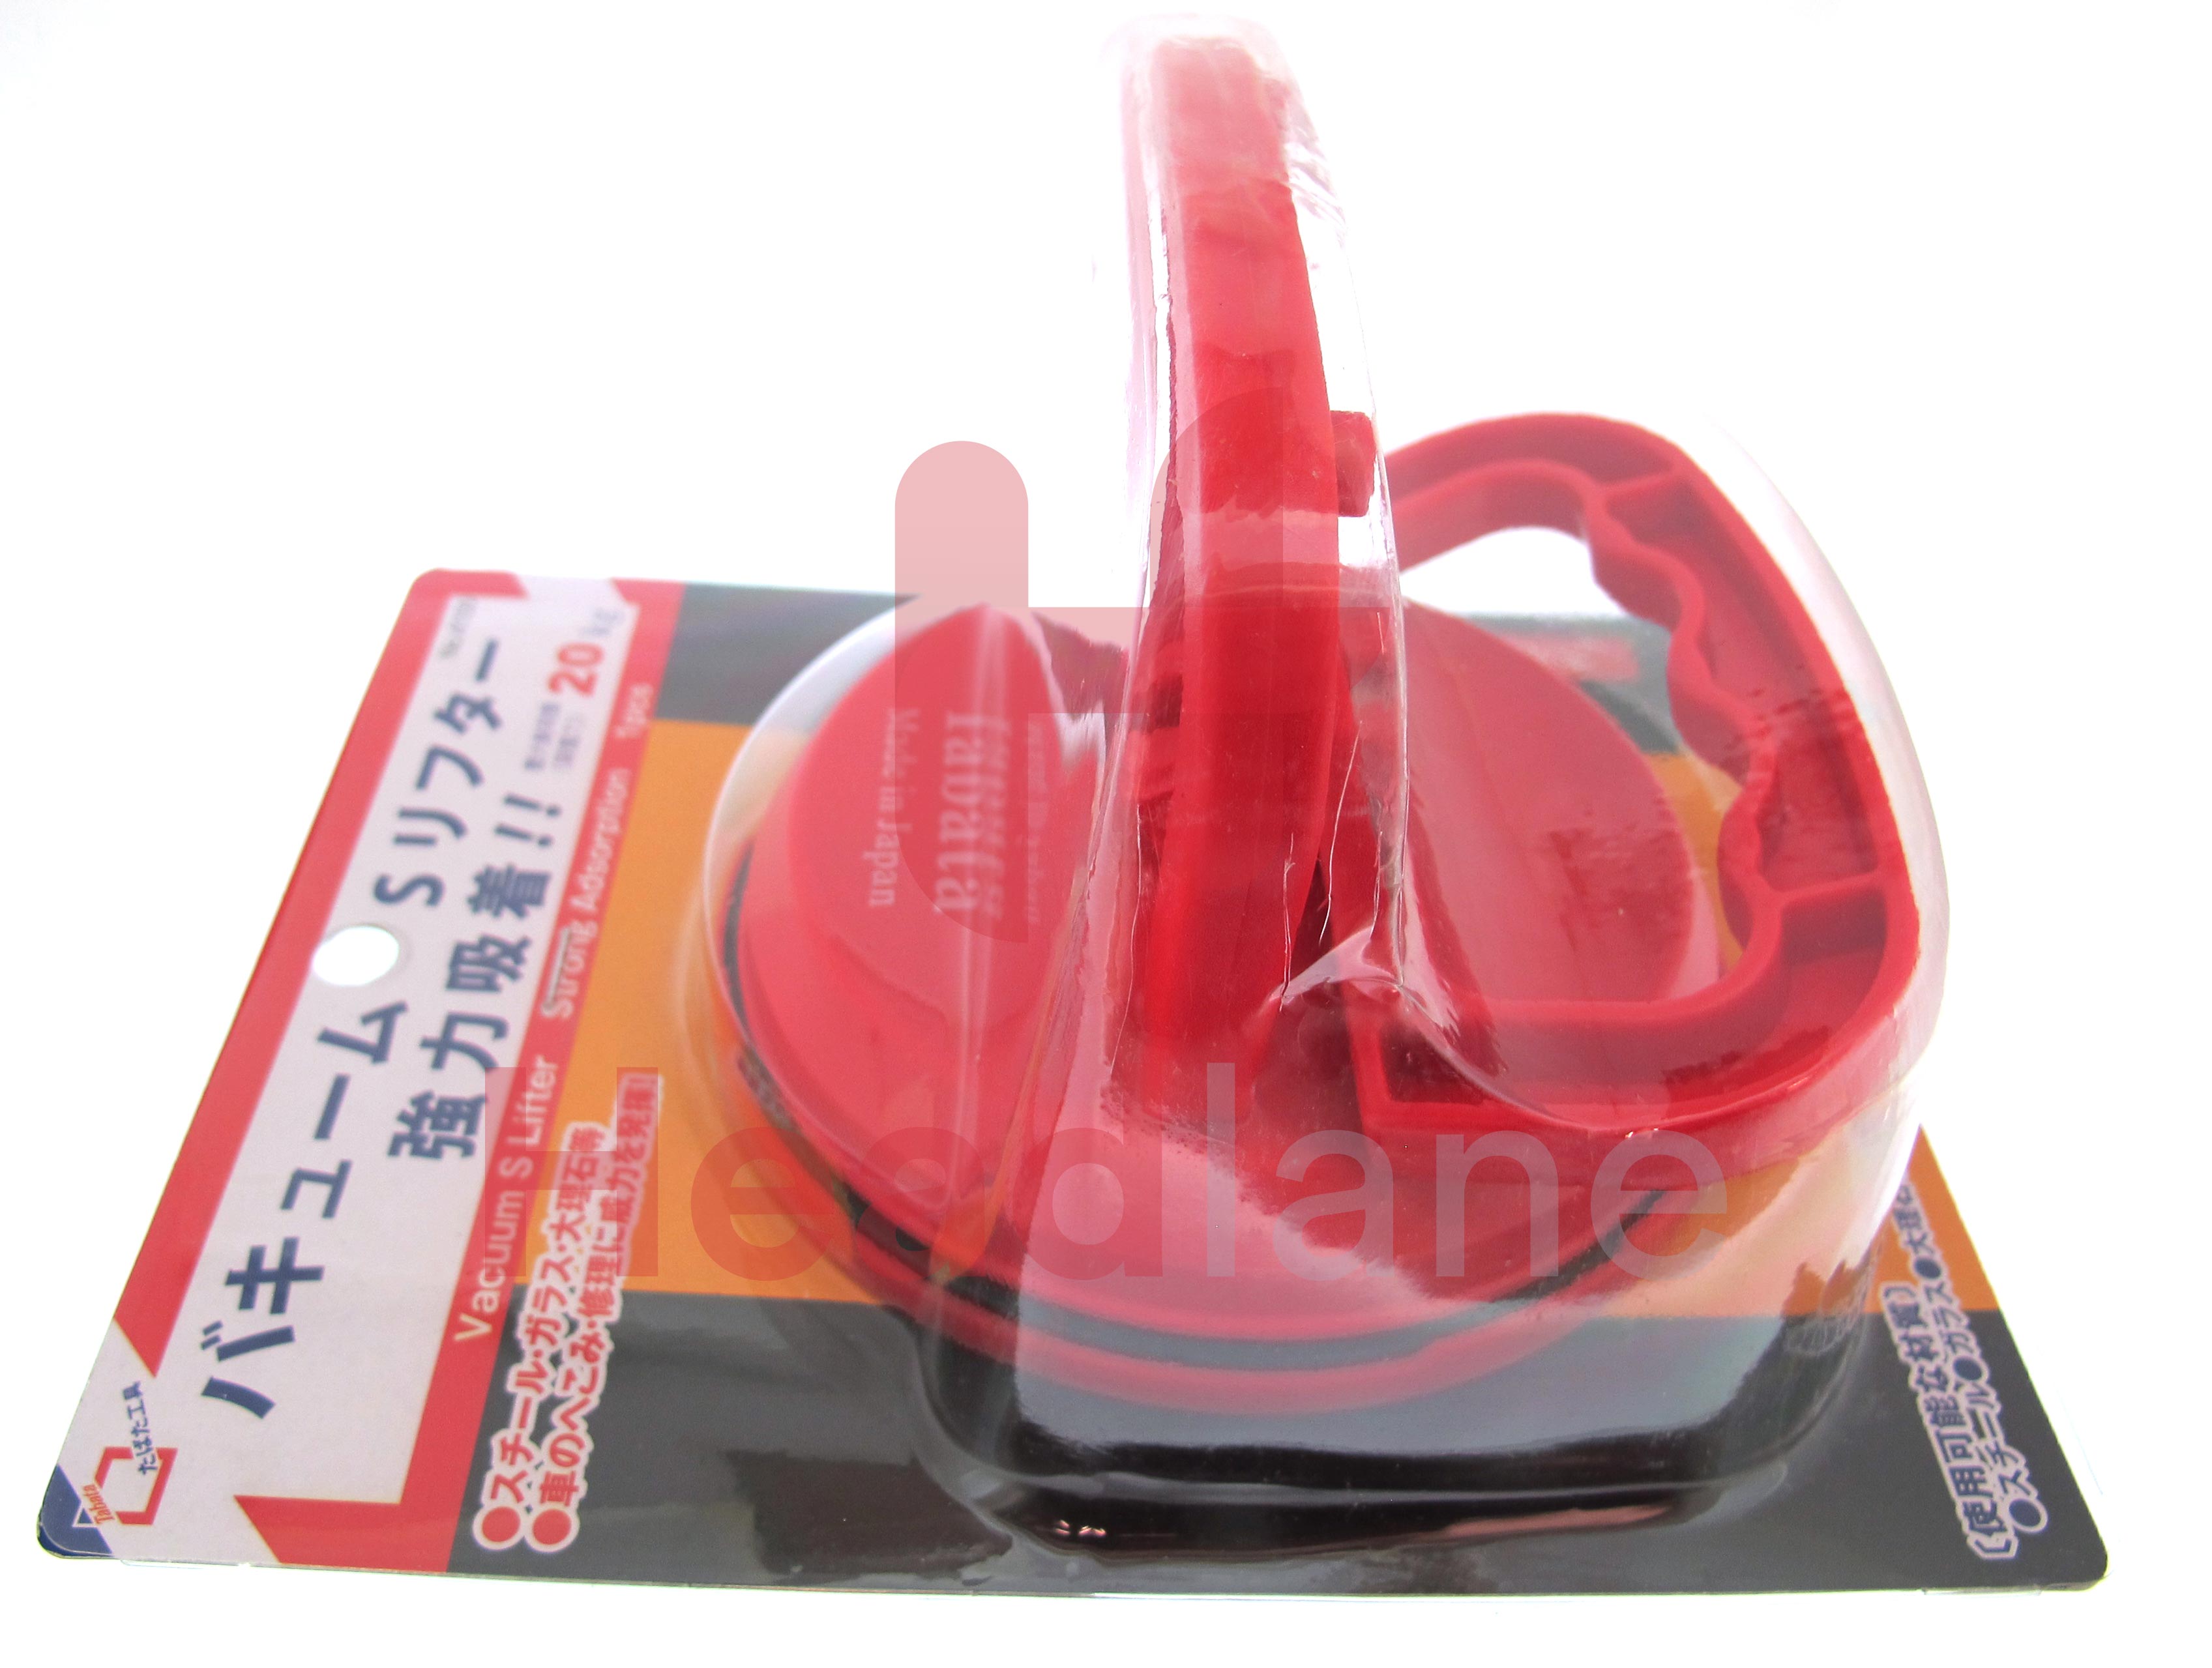 Samsung Suction Cup (for tablets)